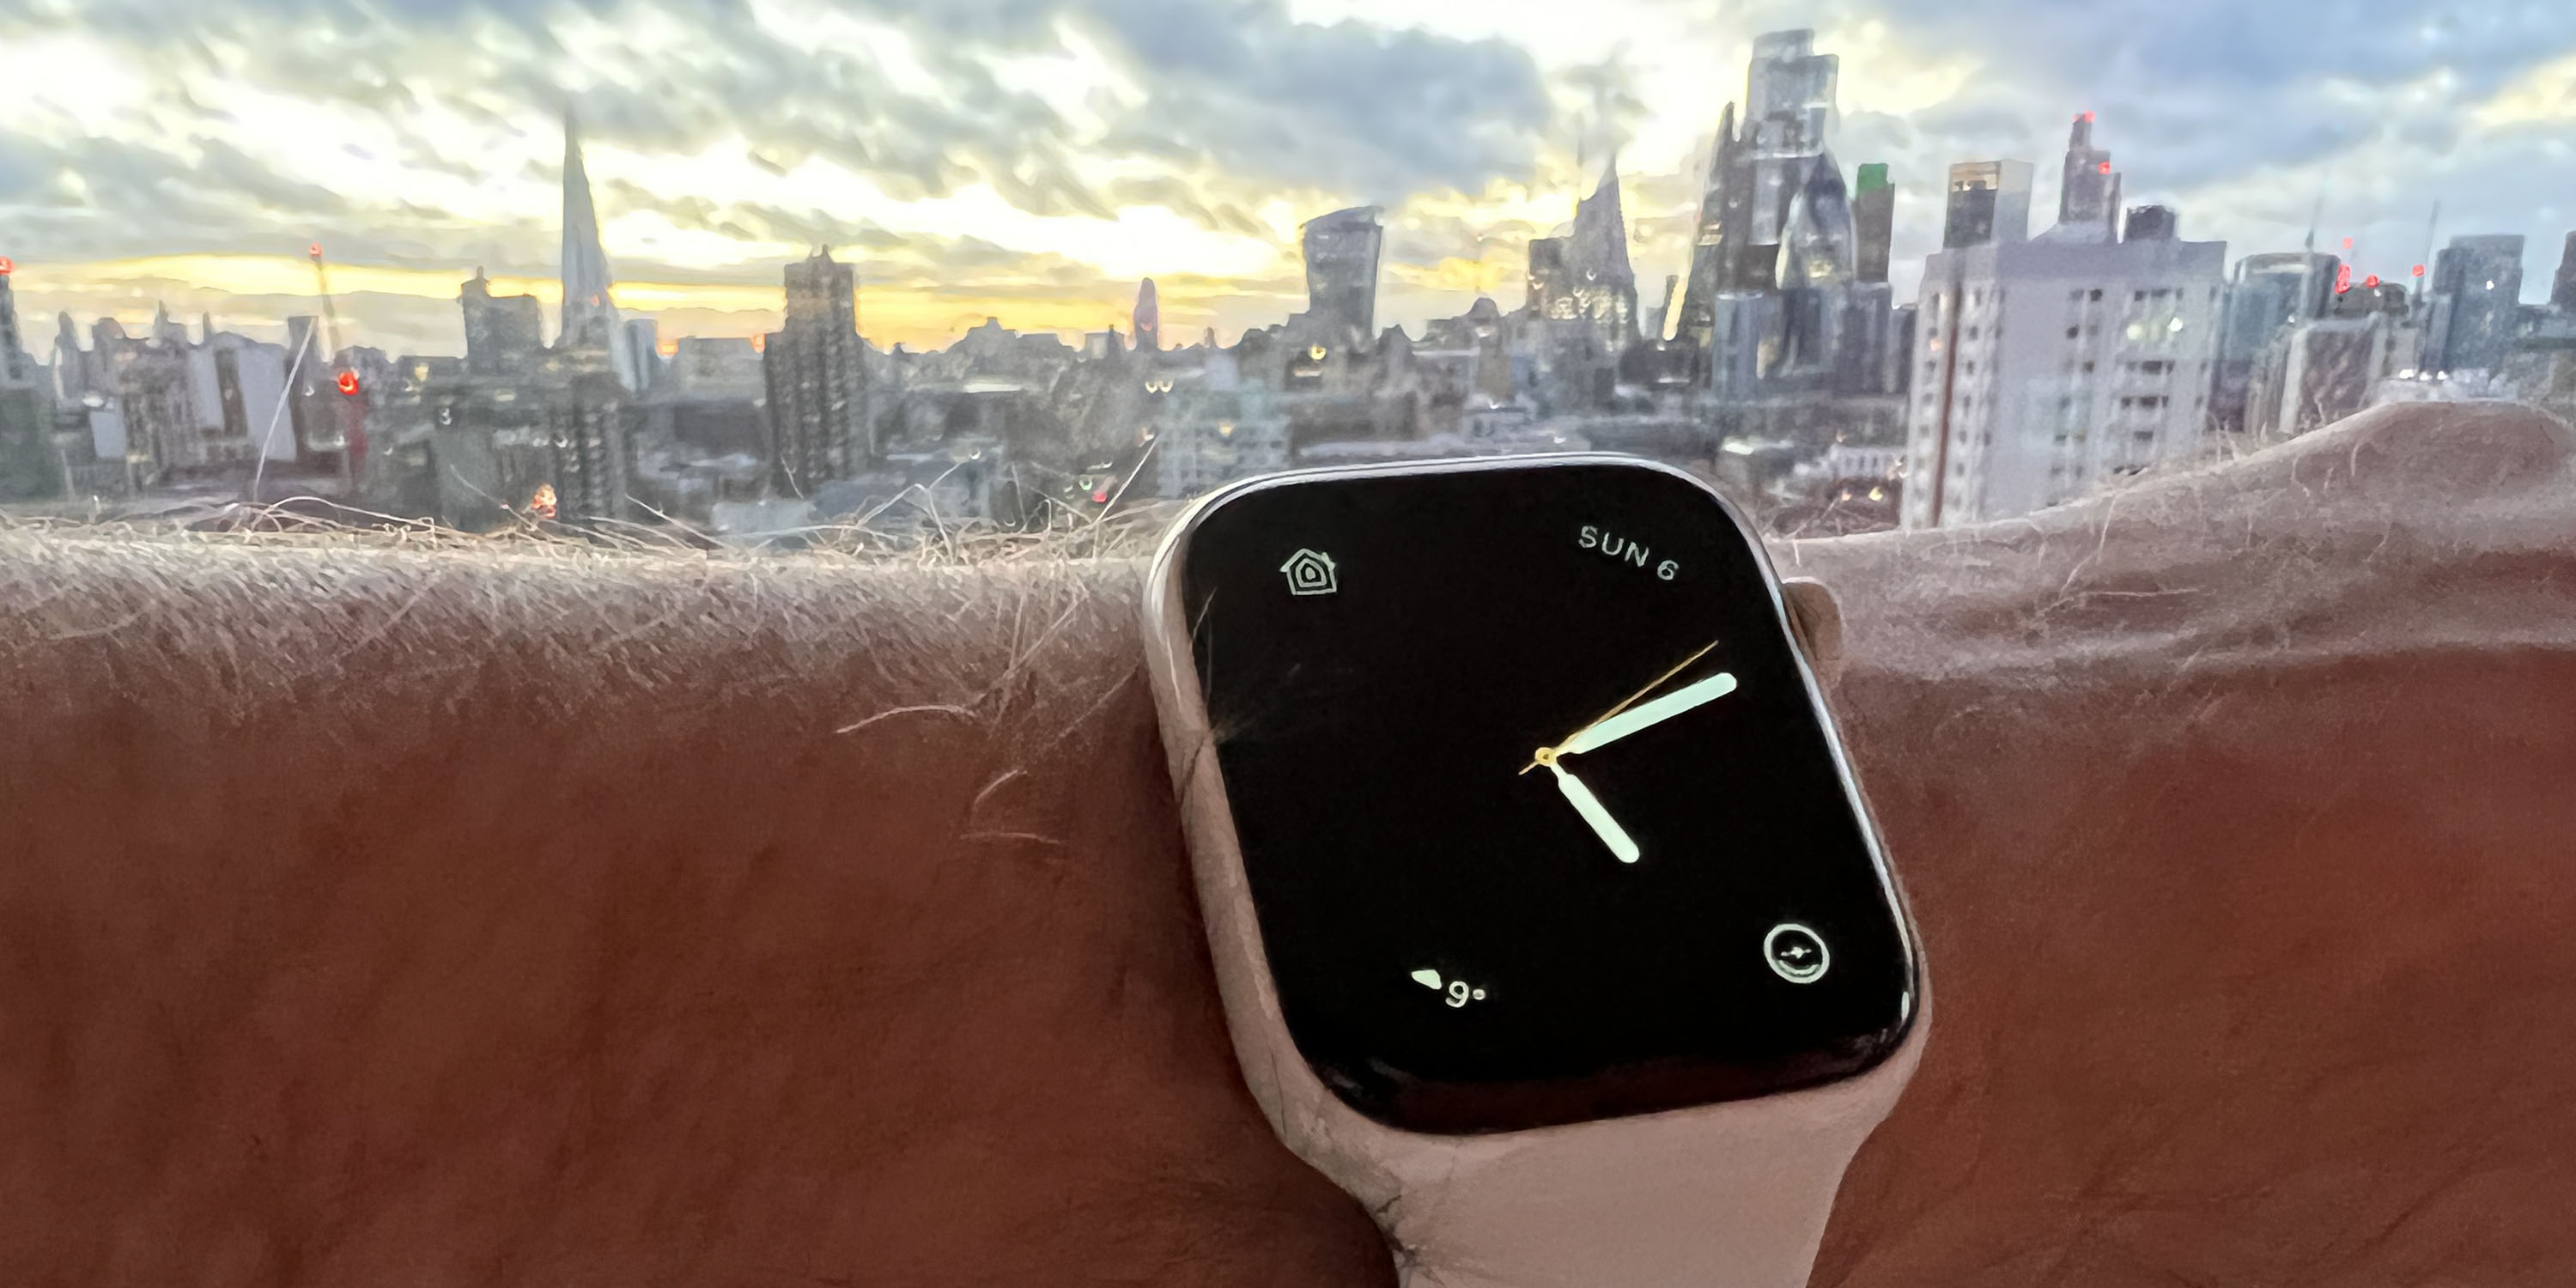 https://9to5mac.com/wp-content/uploads/sites/6/2022/02/Why-I-bought-a-ceramic-Apple-Watch-Series-5-two-years-later.jpg?quality=82&strip=all